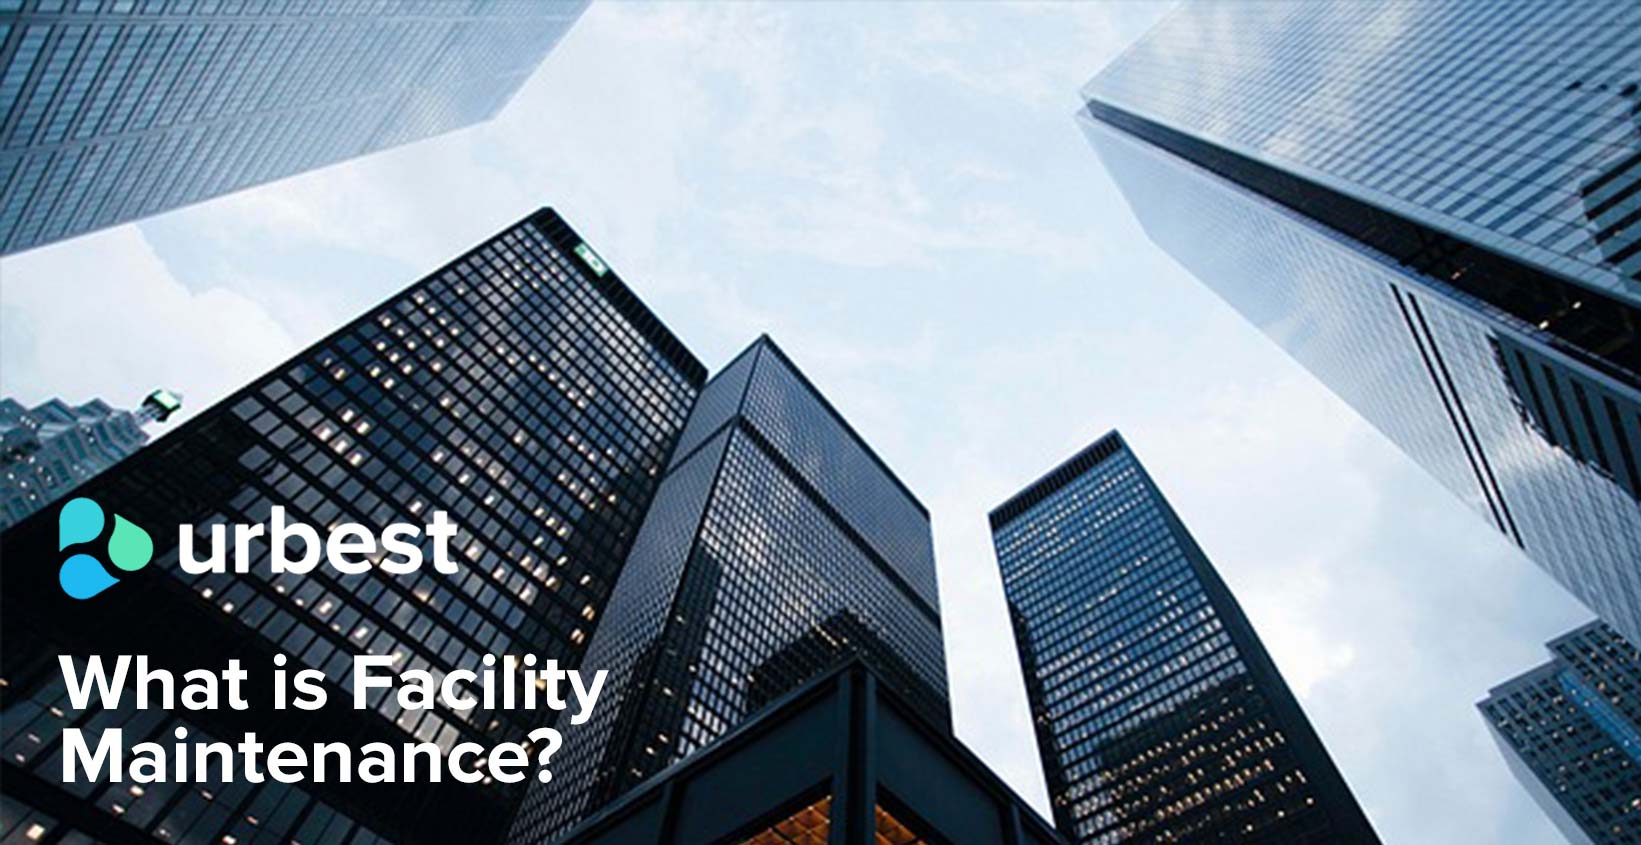 What is Facility Maintenance?